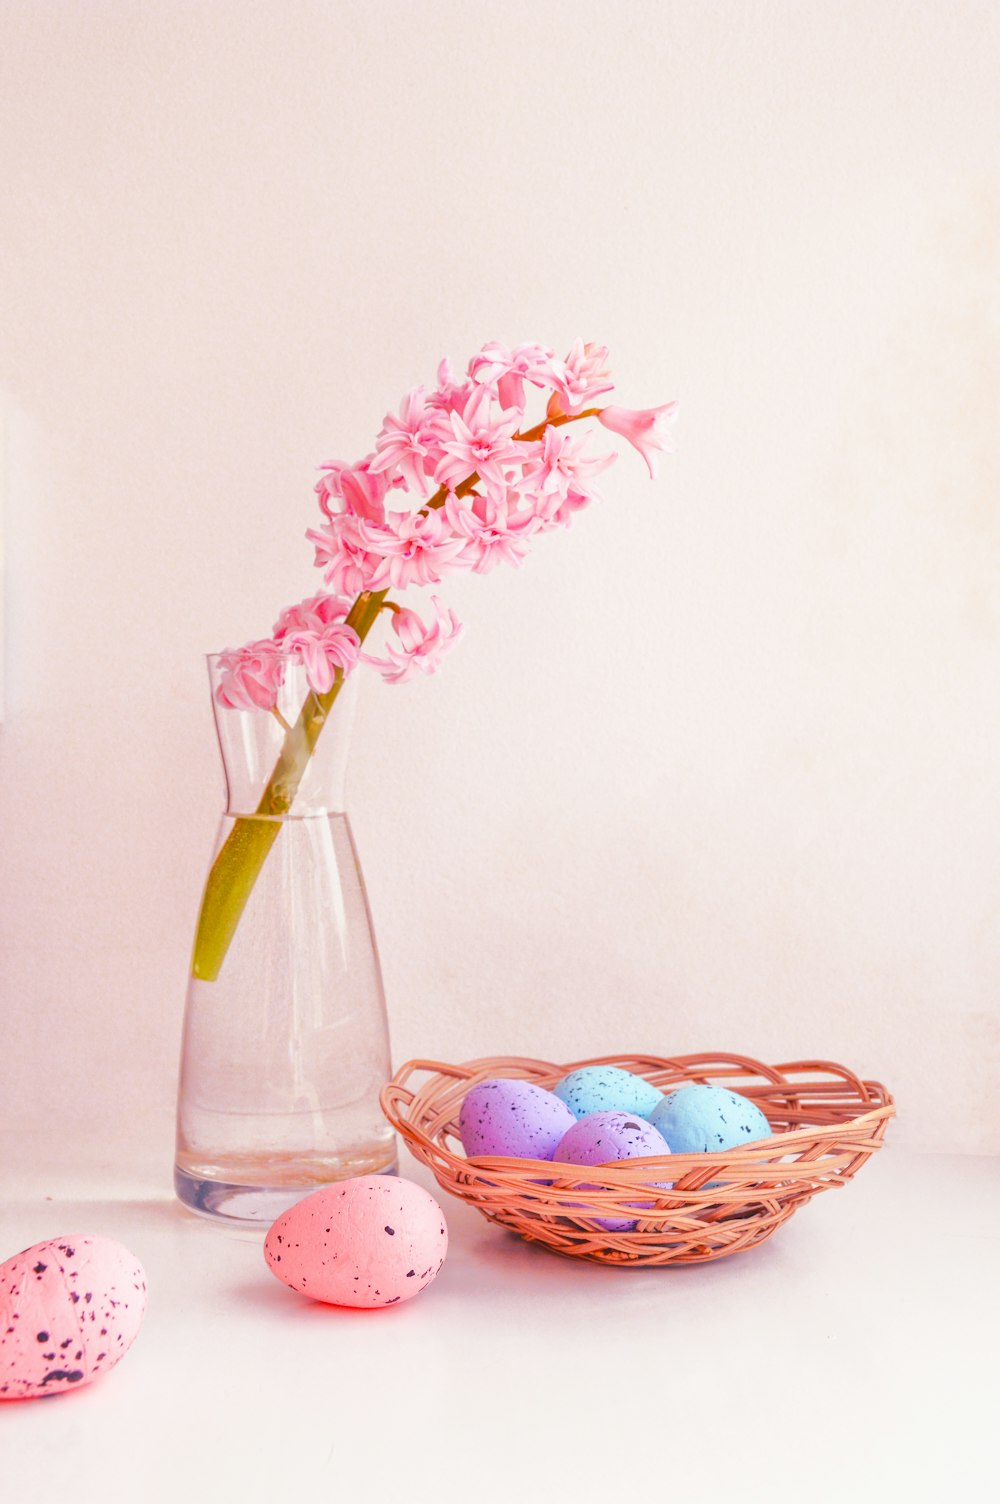 a vase filled with pink flowers next to a basket of eggs